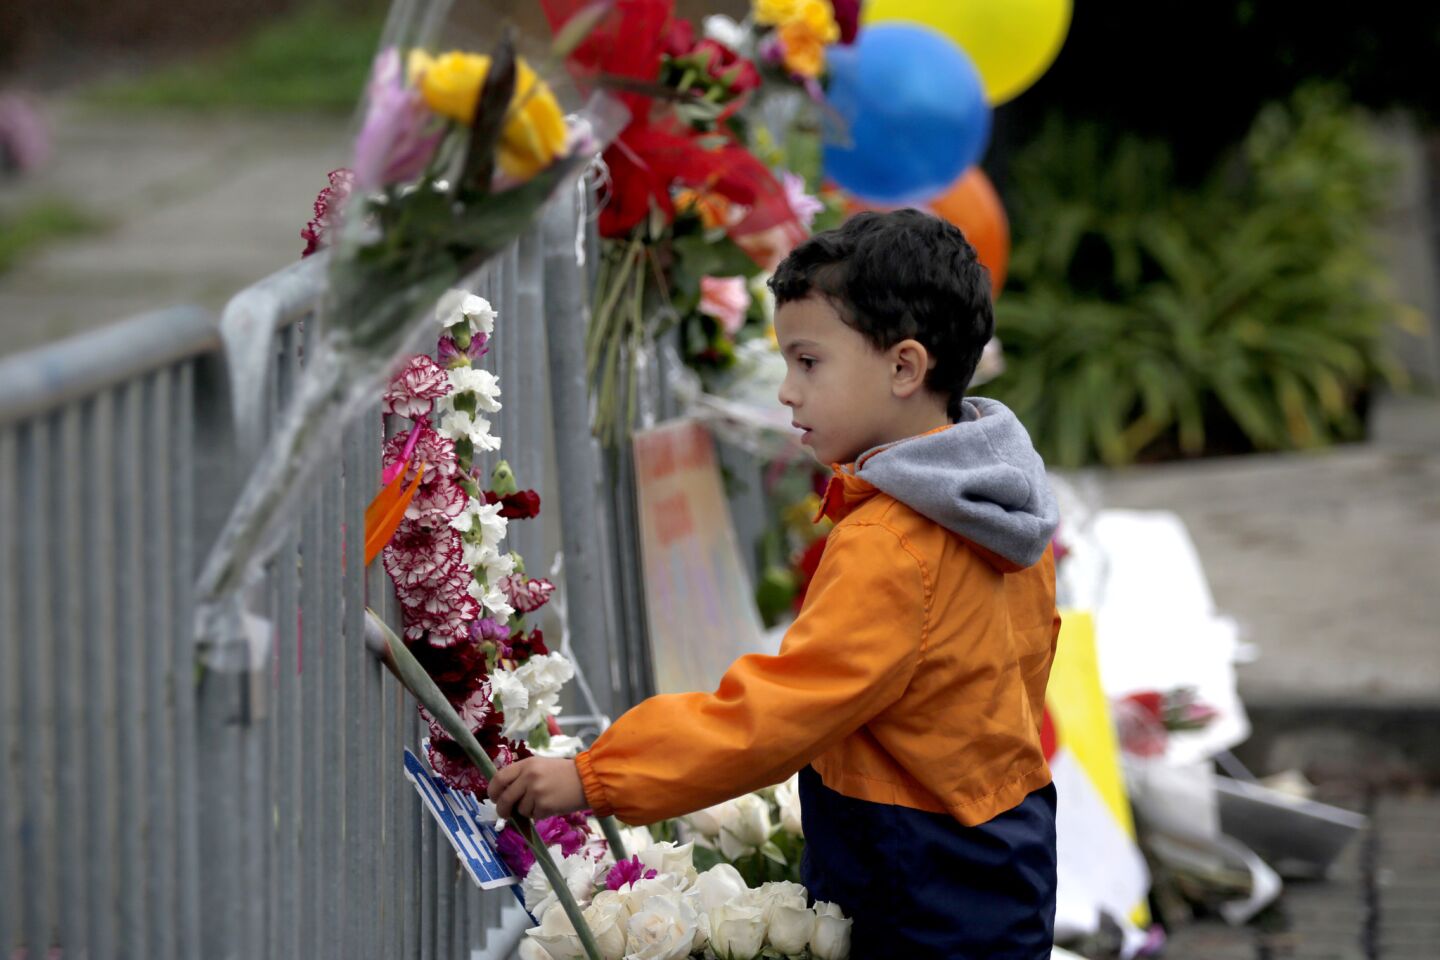 Titus Cromwell, 4, places a flower from his family's garden near the scene of the Ghost Ship warehouse fire in Oakland.